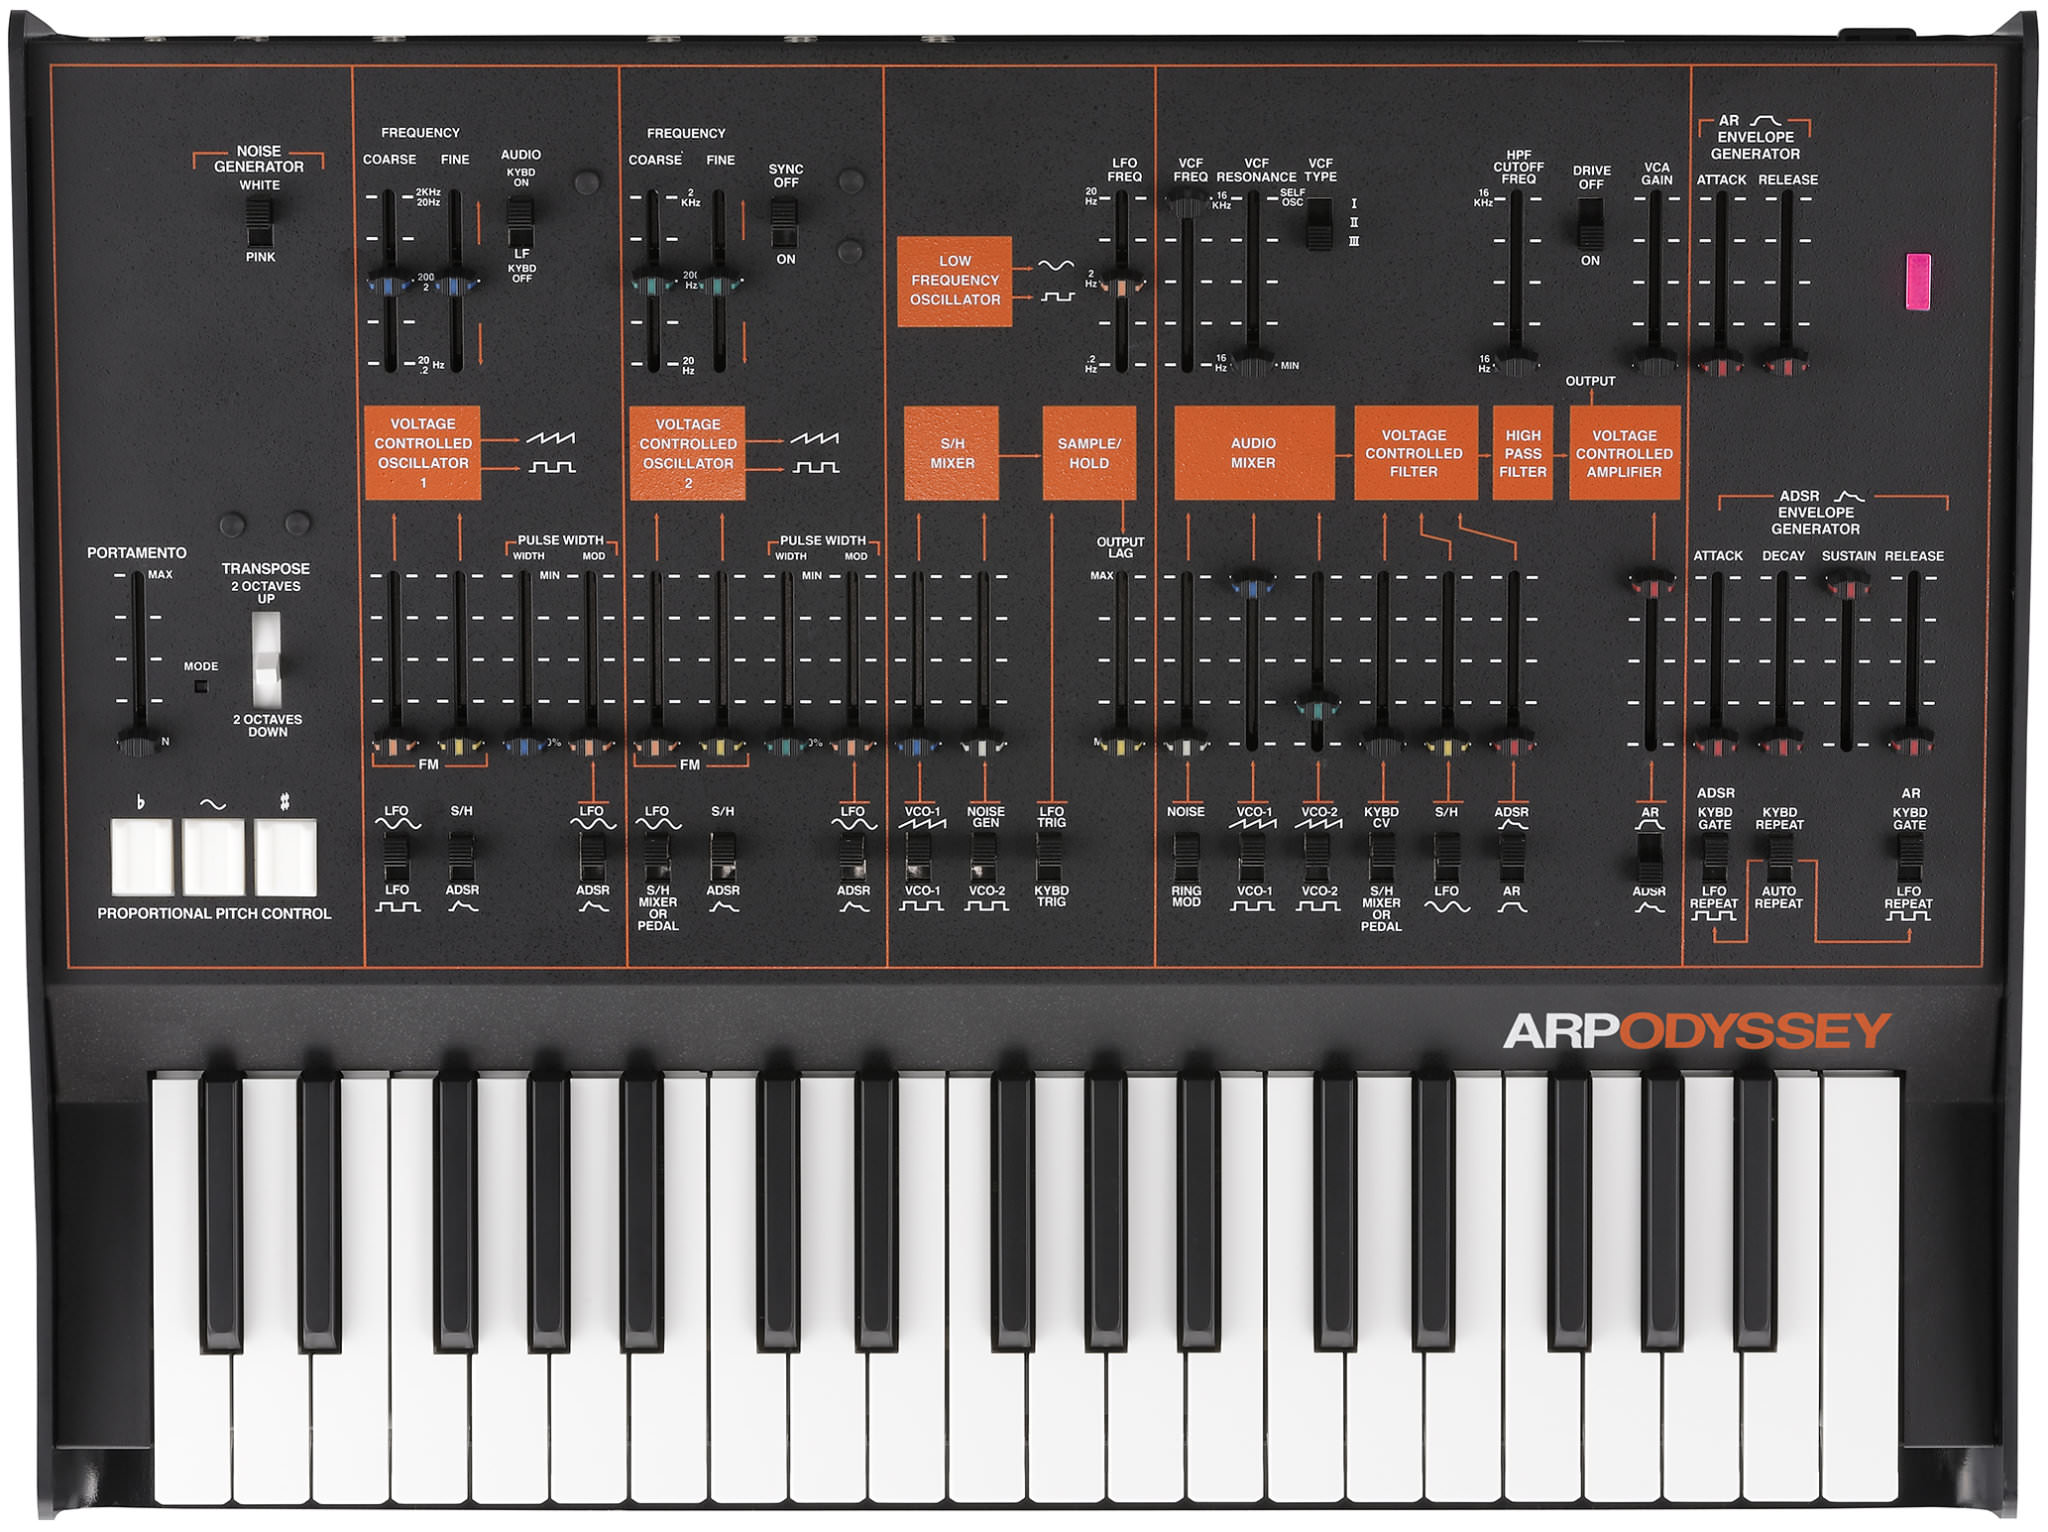 Ten Of The Best New Hardware Synths Page 8 of 10 Attack Magazine